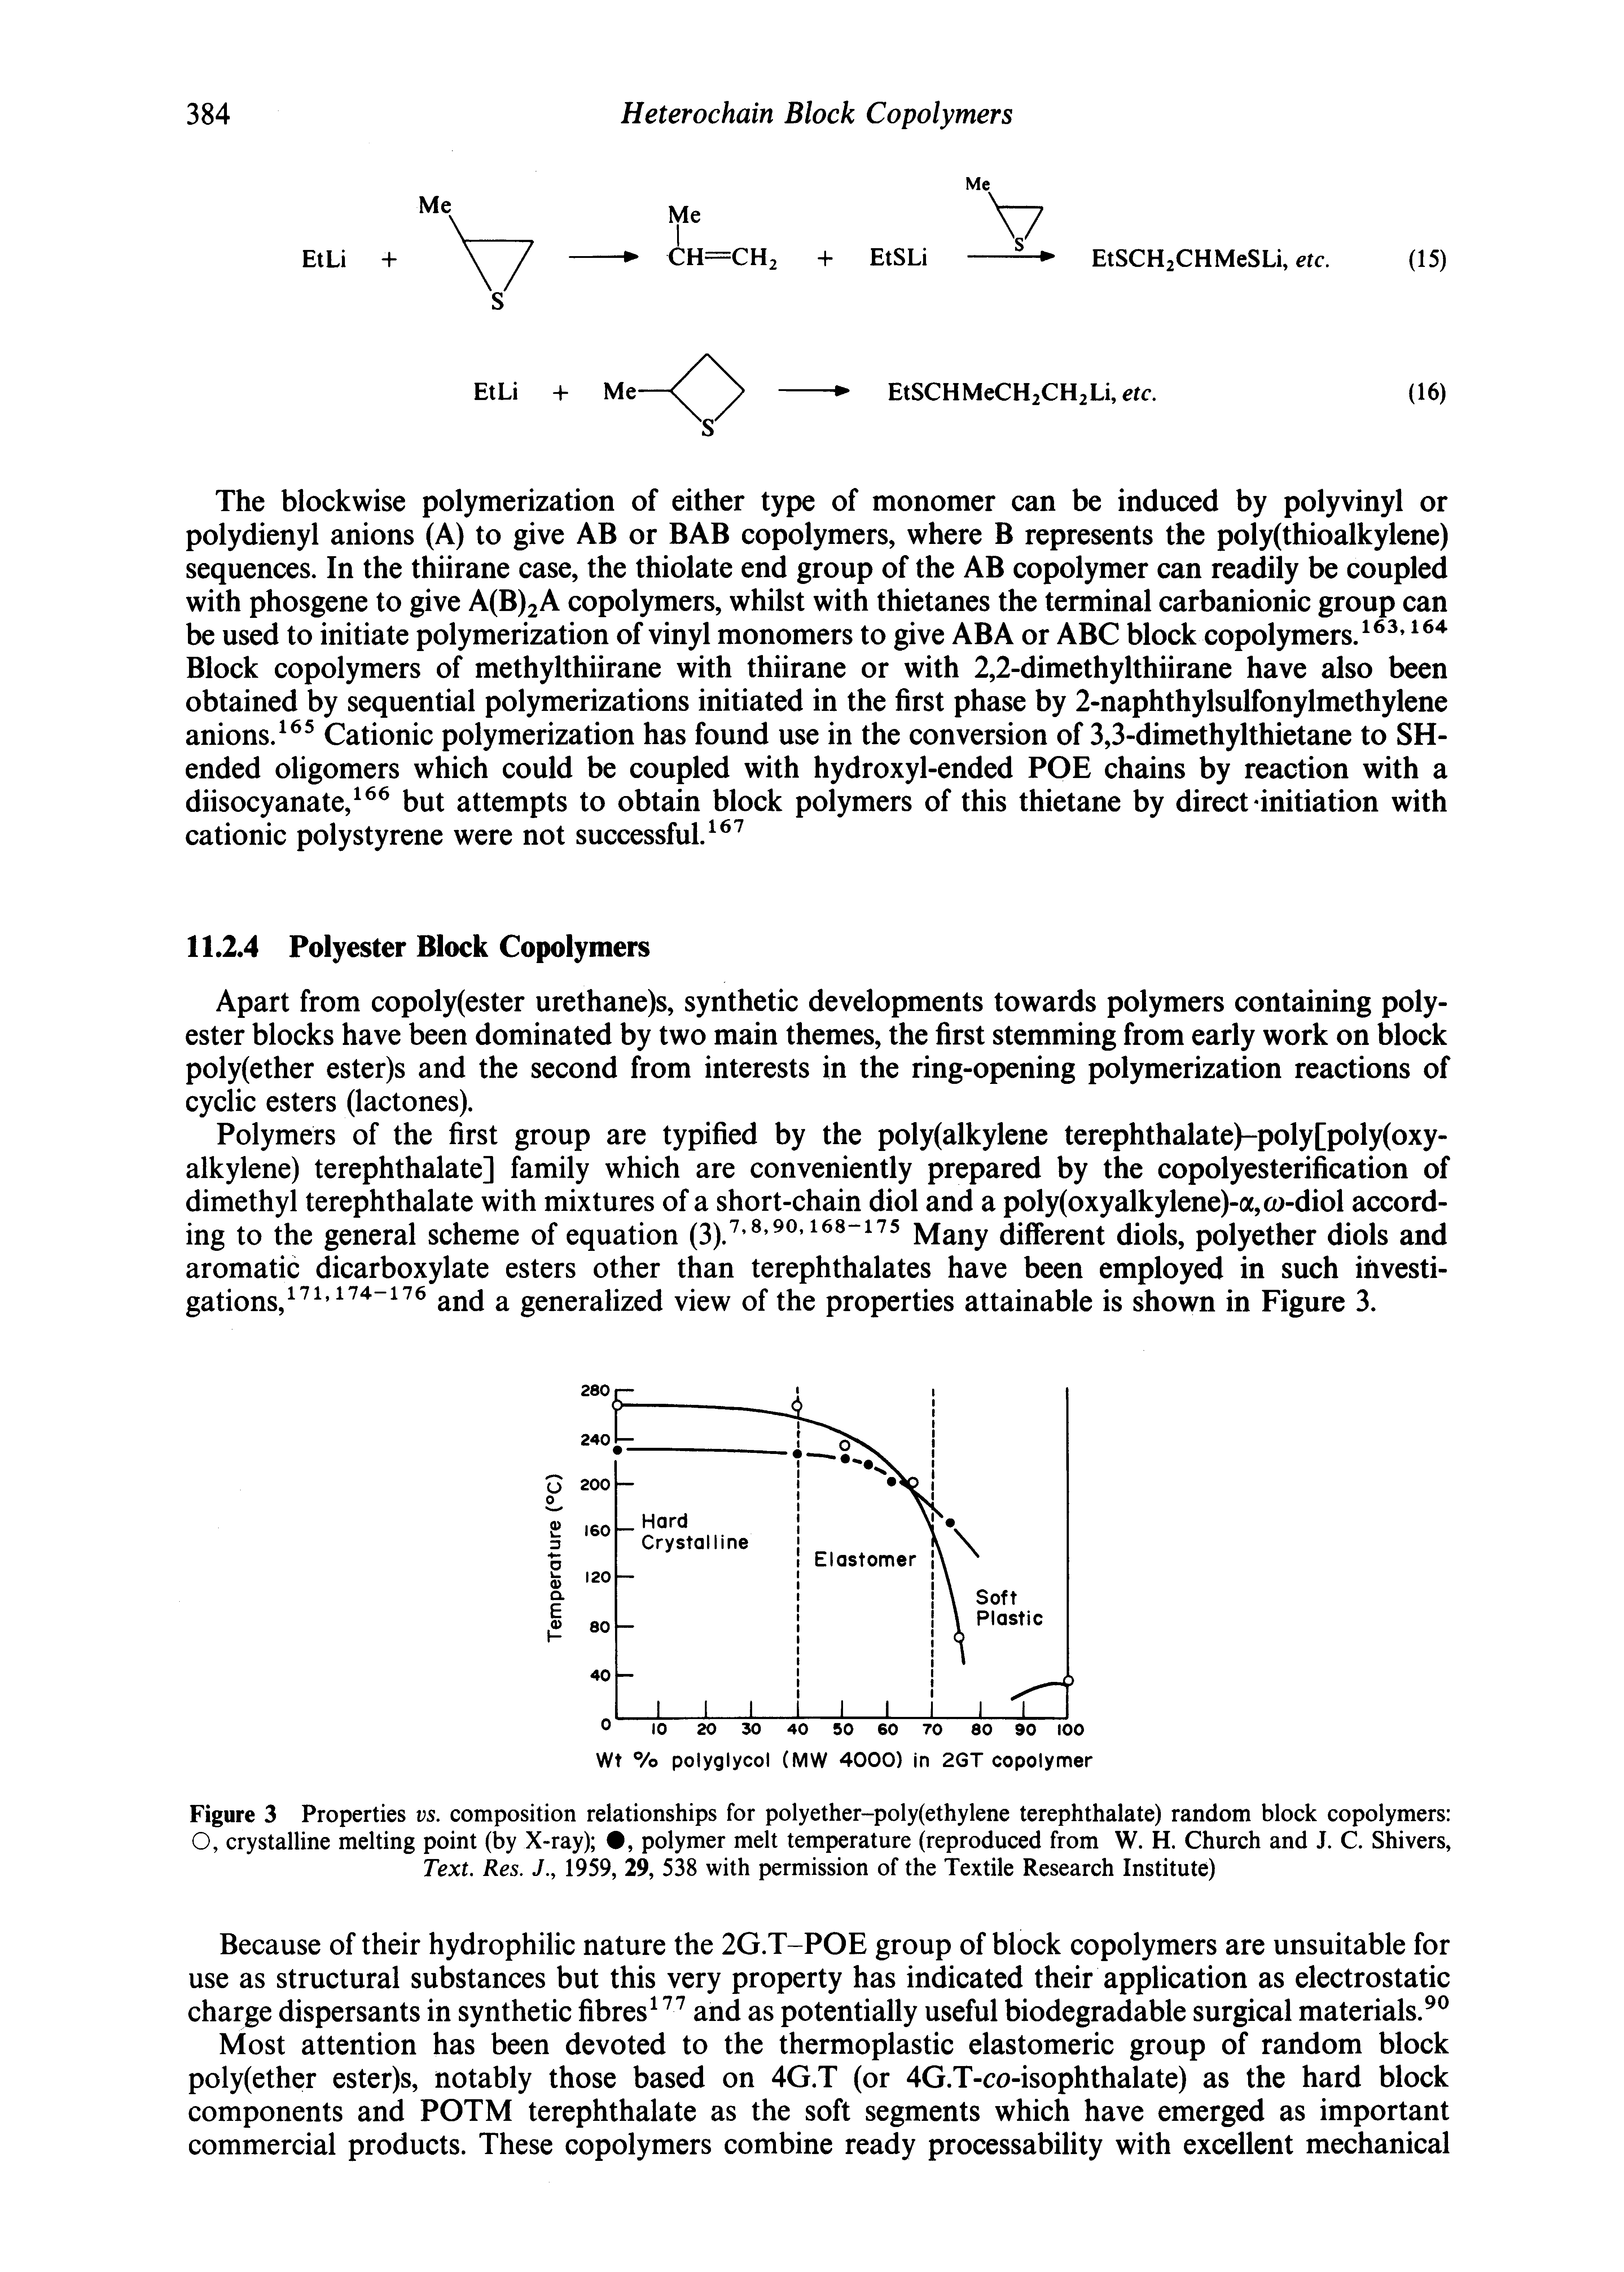 Figure 3 Properties vs. composition relationships for polyether-poly(ethylene terephthalate) random block copolymers O, crystalline melting point (by X-ray) , polymer melt temperature (reproduced from W. H. Church and J. C. Shivers, Text. Res. J., 1959, 29, 538 with permission of the Textile Research Institute)...